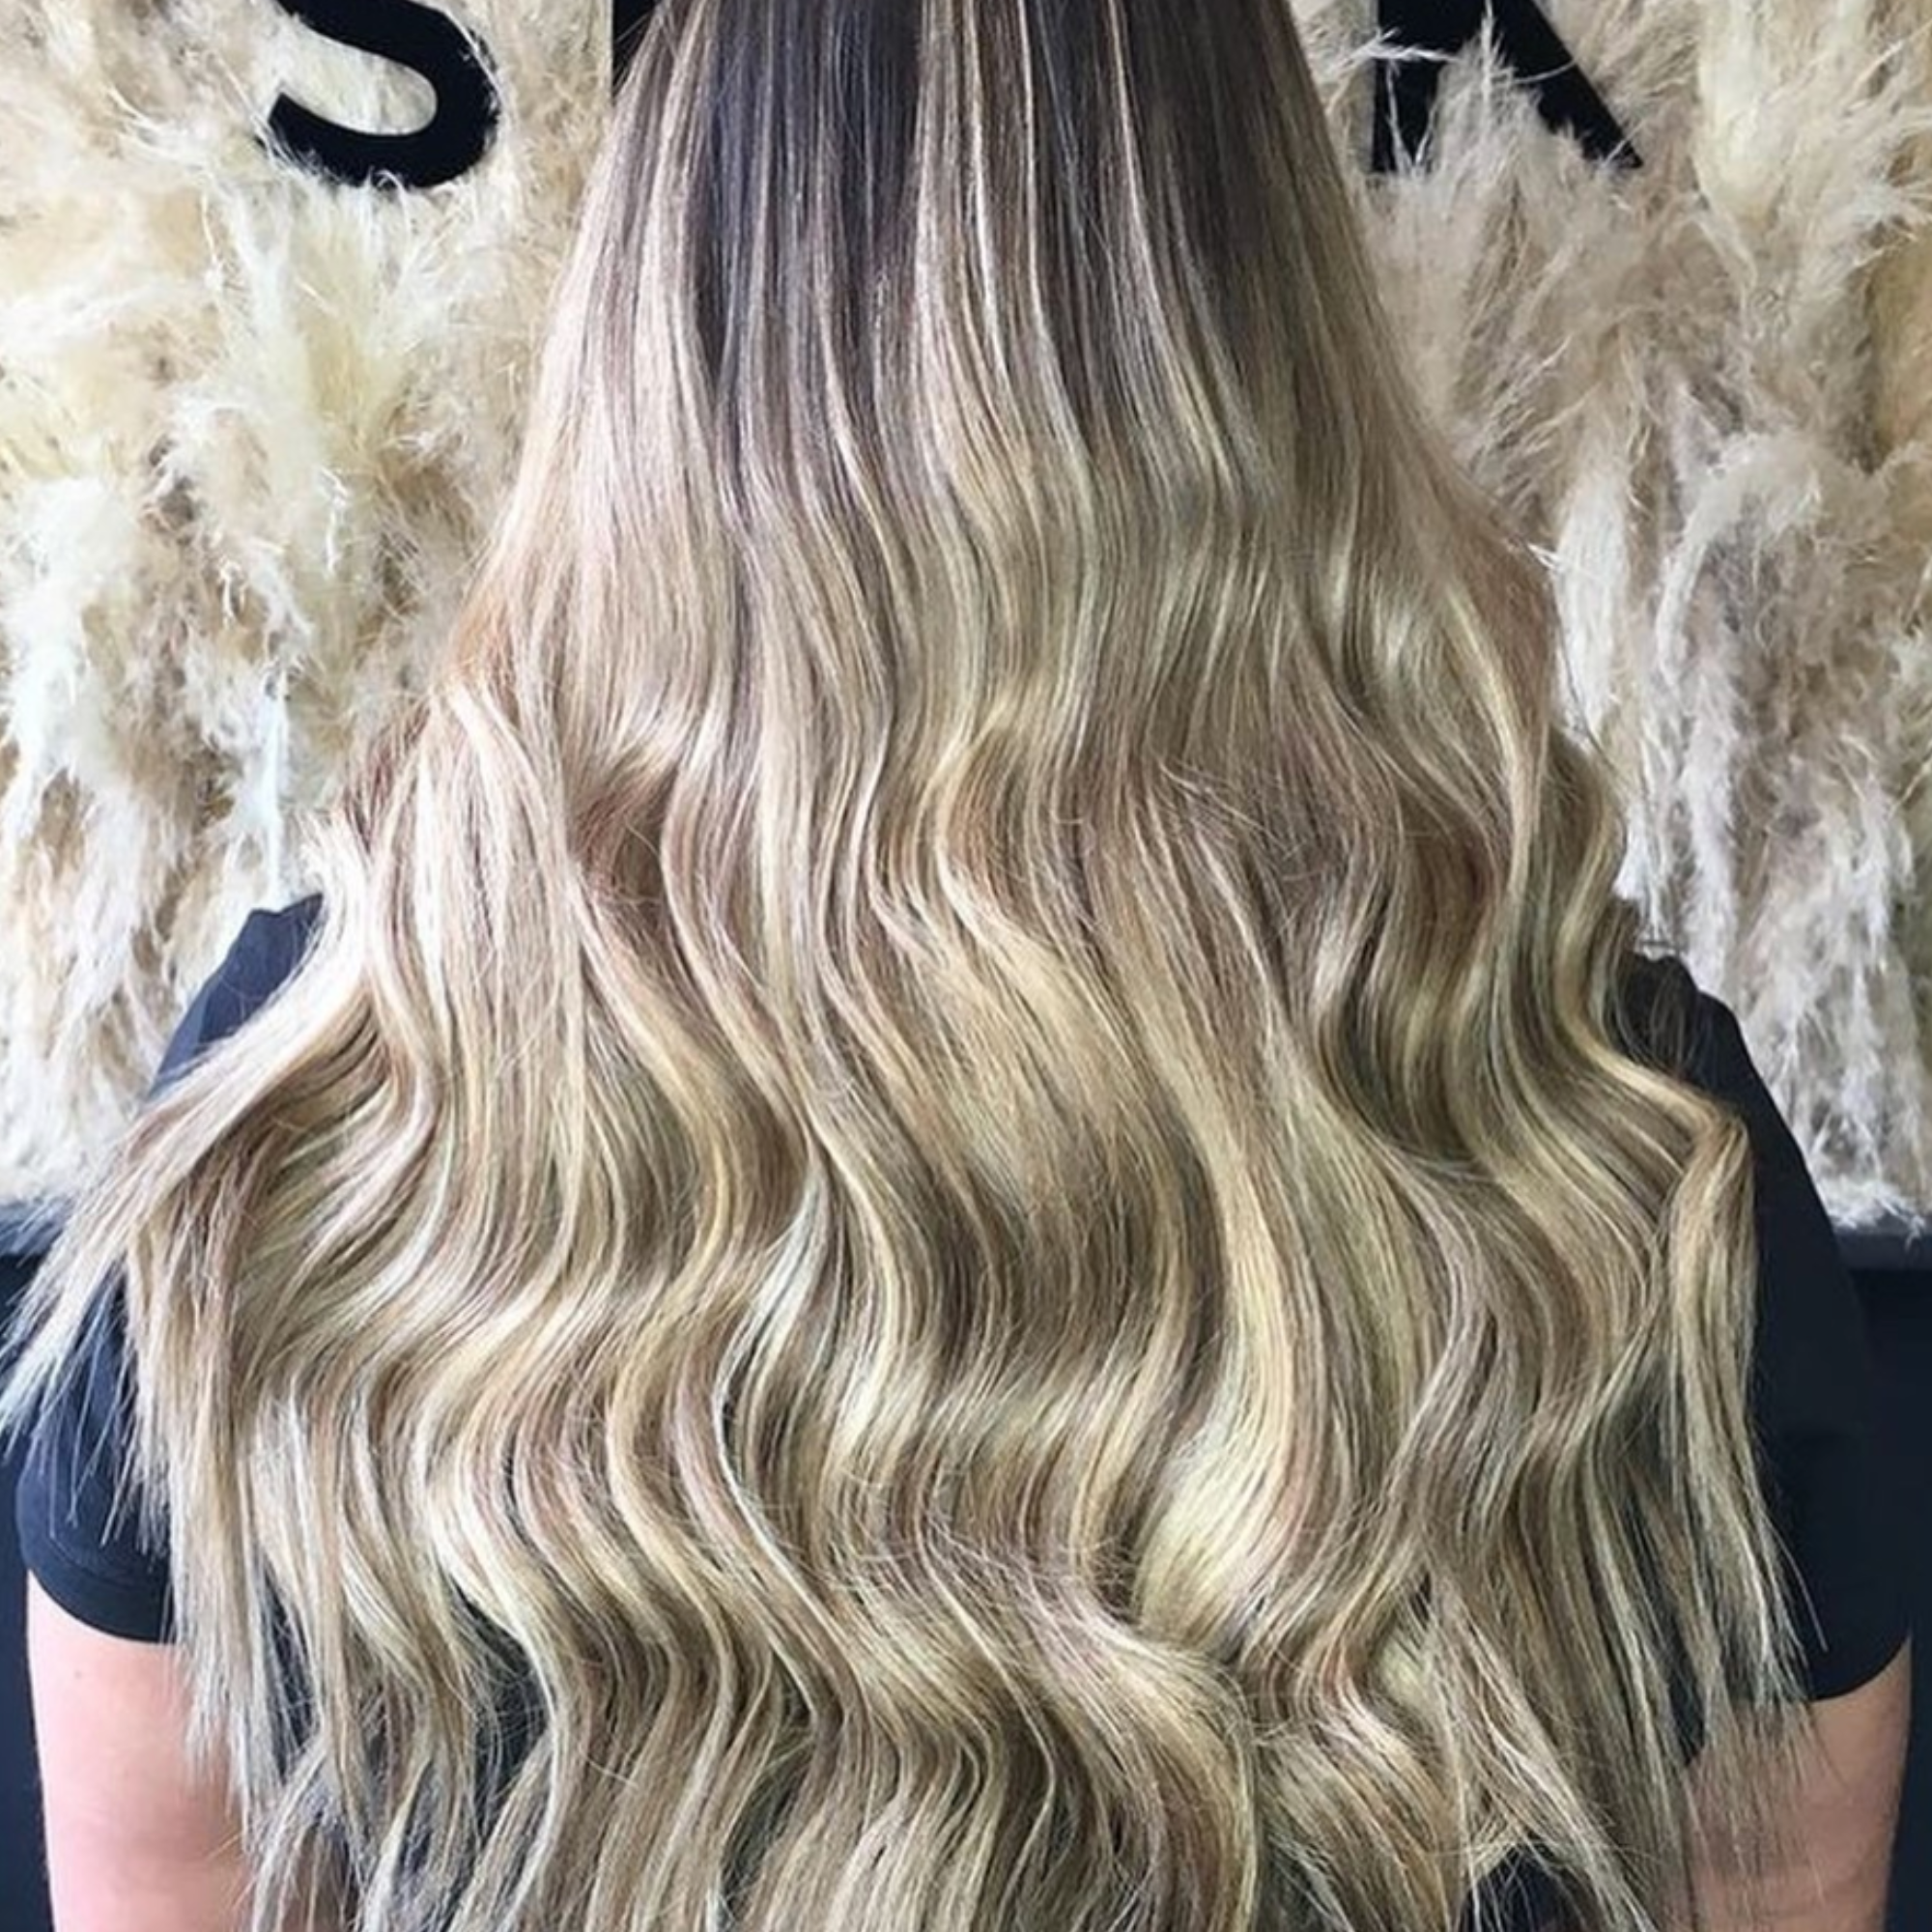 18" Prebonded Extensions Rooted Coachella